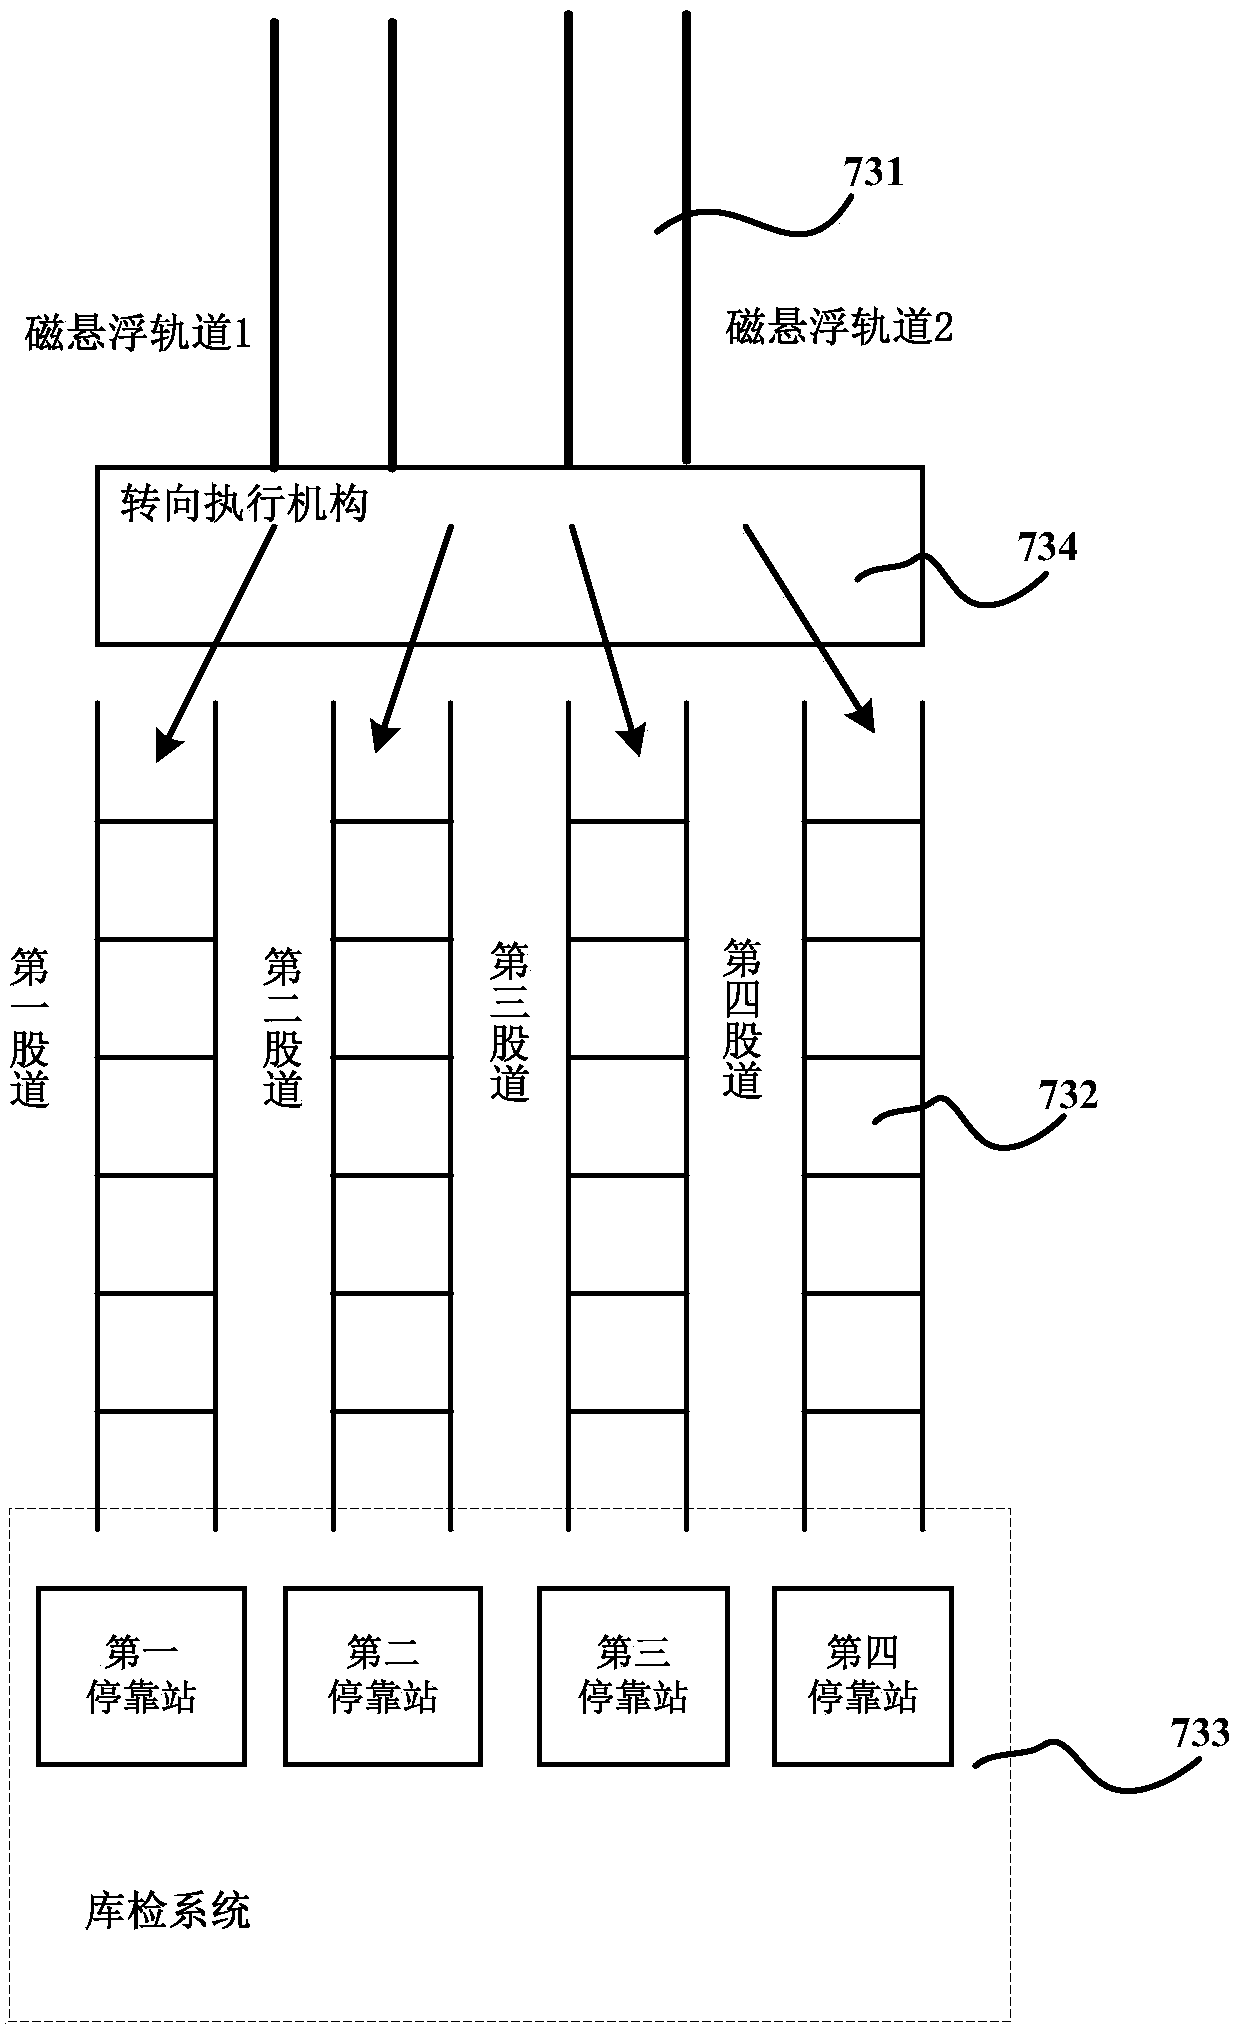 Automatic stopping control system and automatic stopping control method for train station